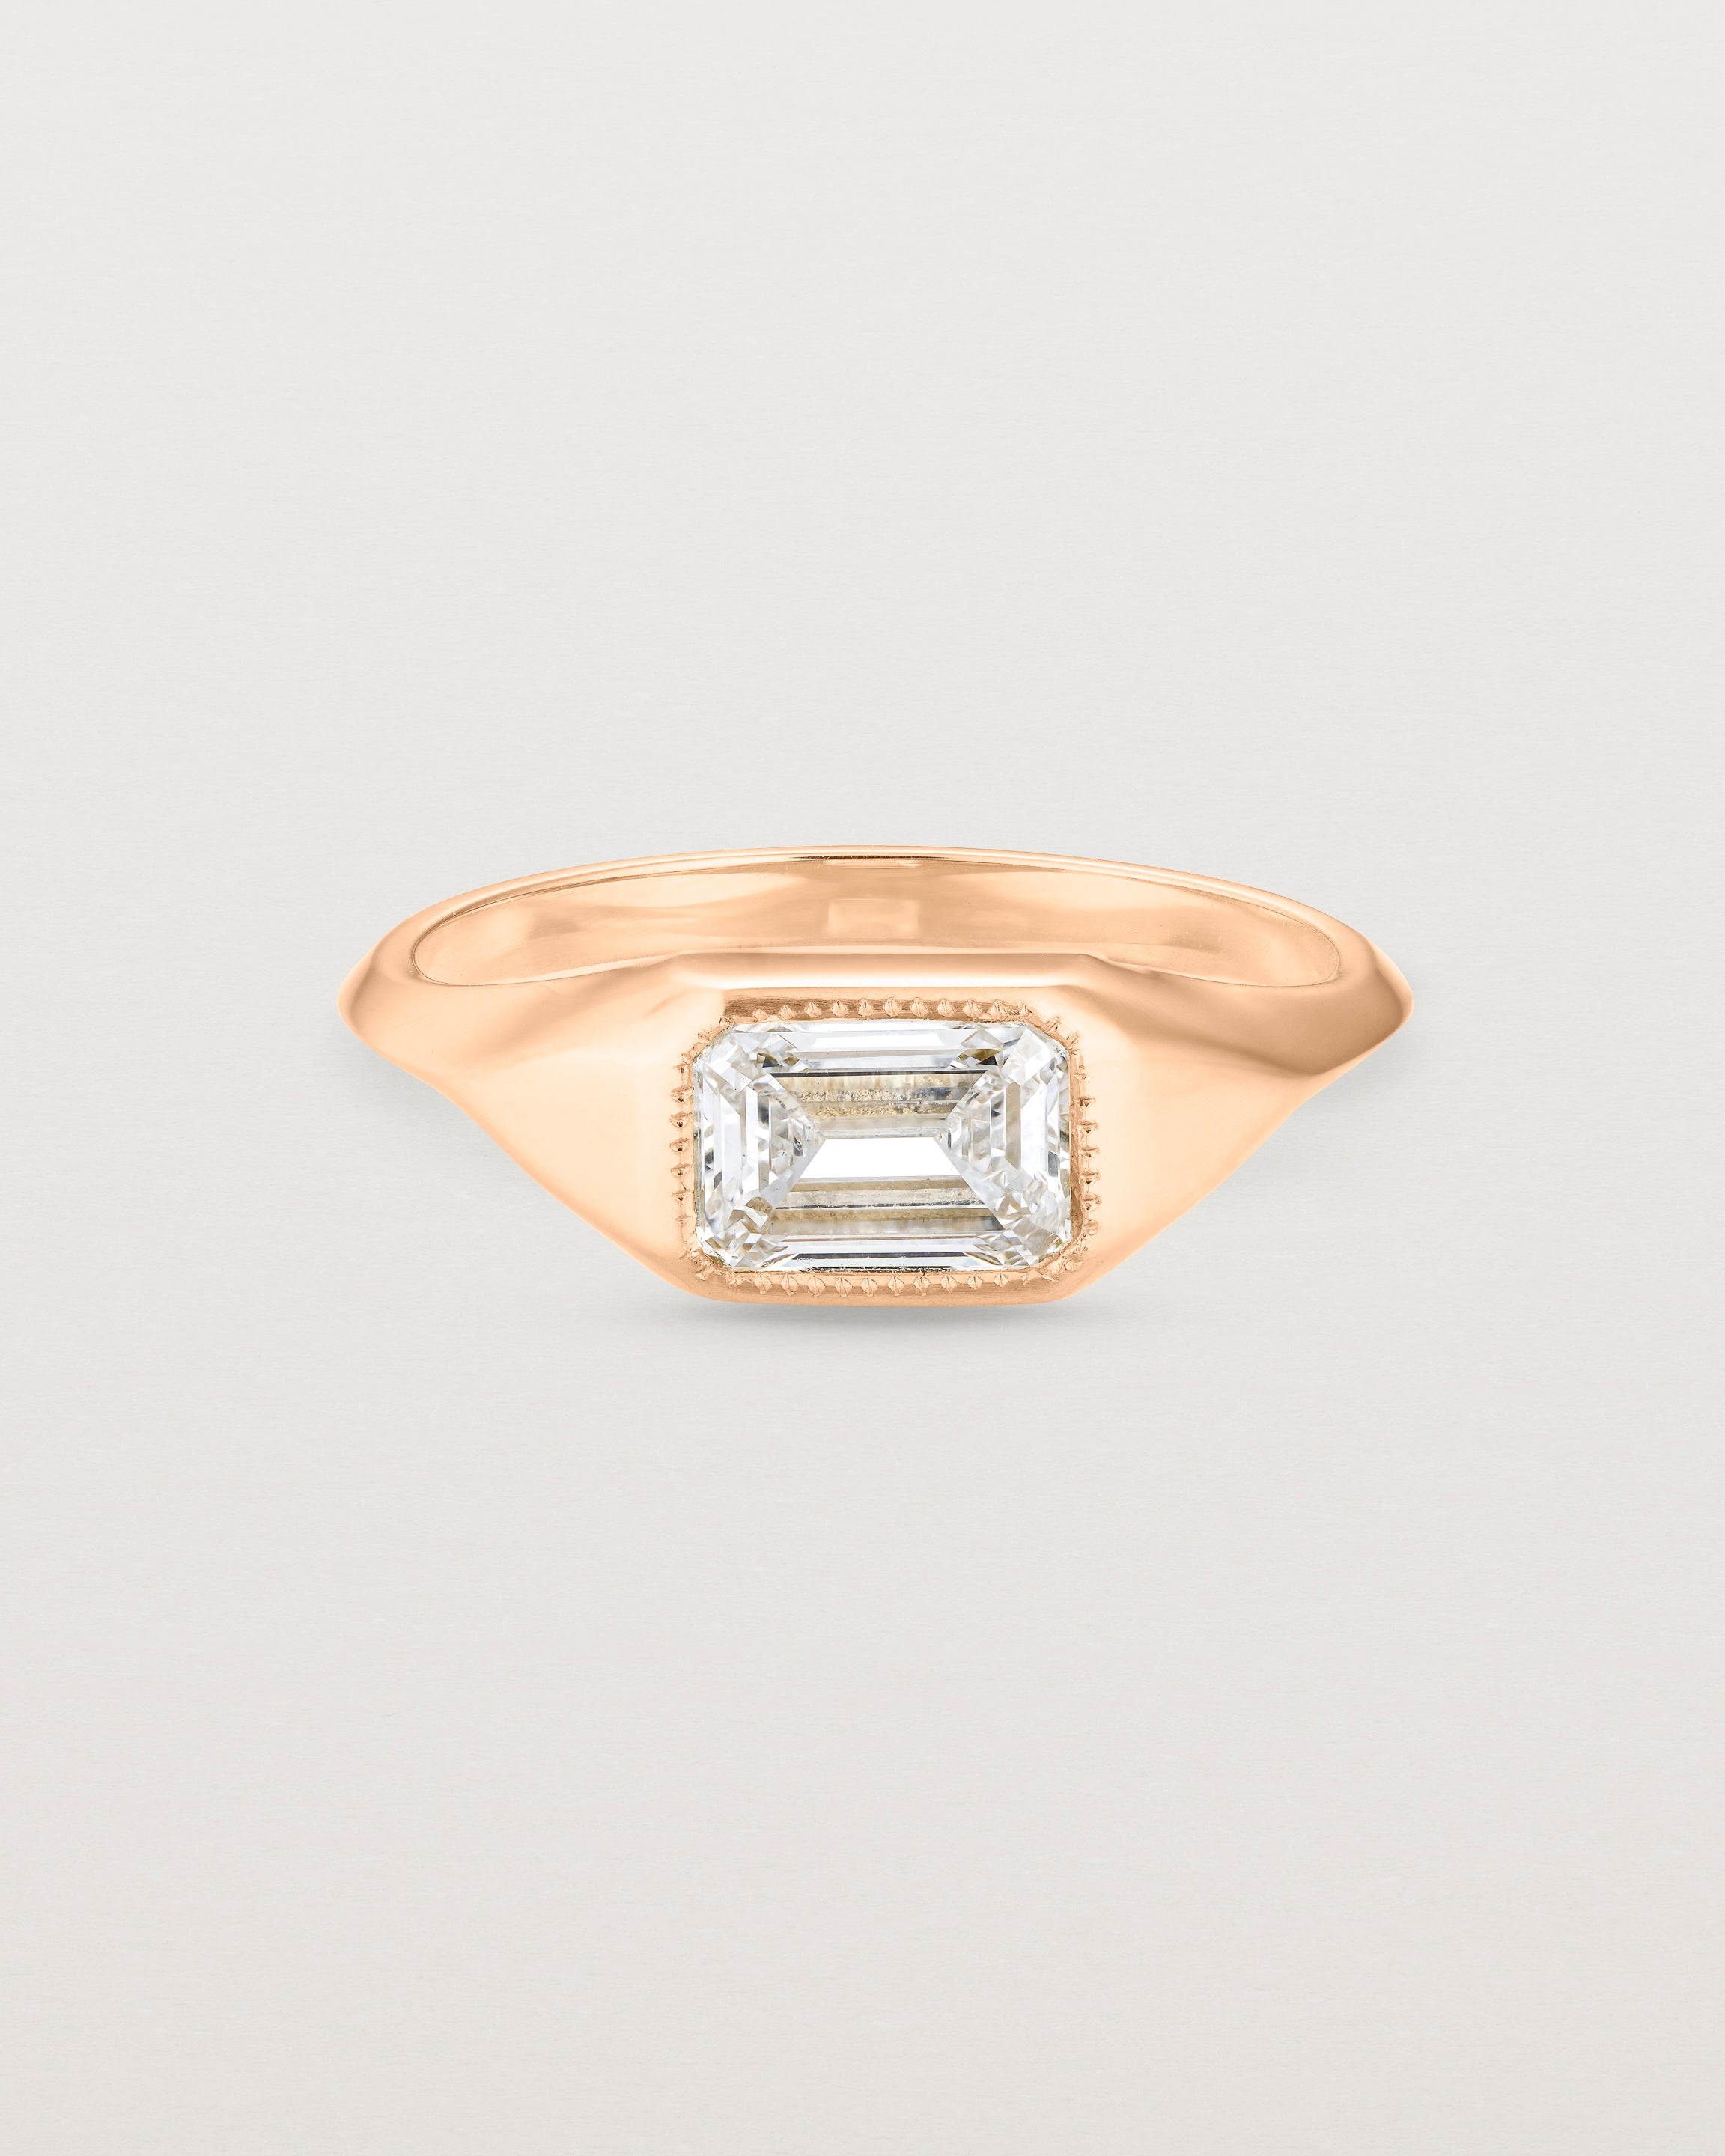  Front view of the Átlas Emerald Signet | Laboratory Grown Diamond in rose gold with a polished finish. _label: Polished Finish Example